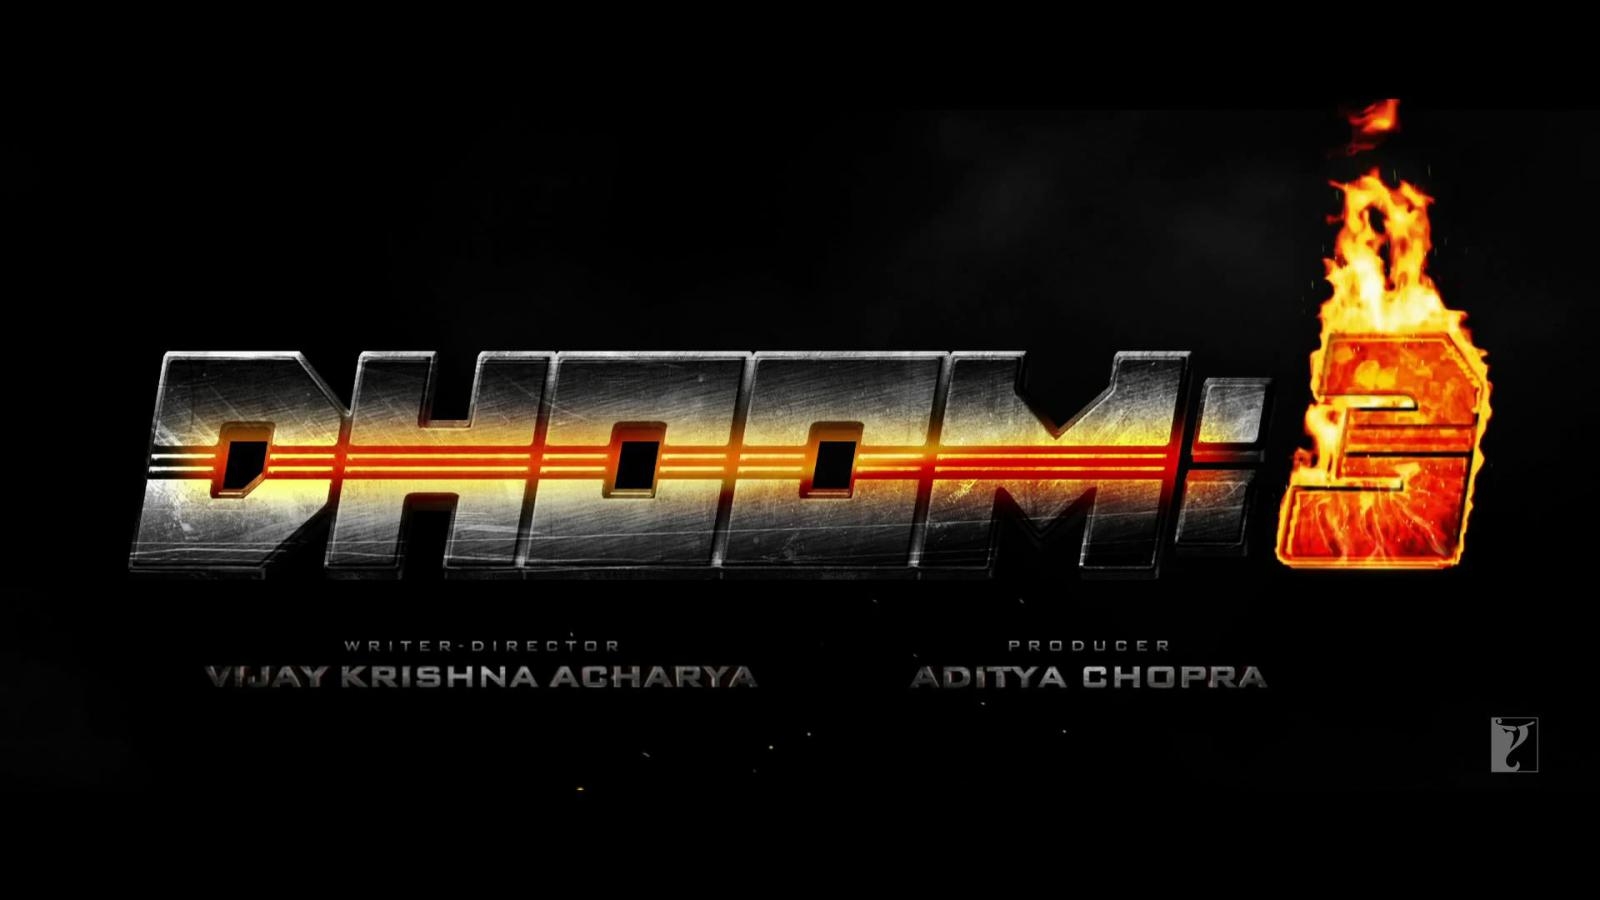 Dhoom 3 logo appeals the crowds